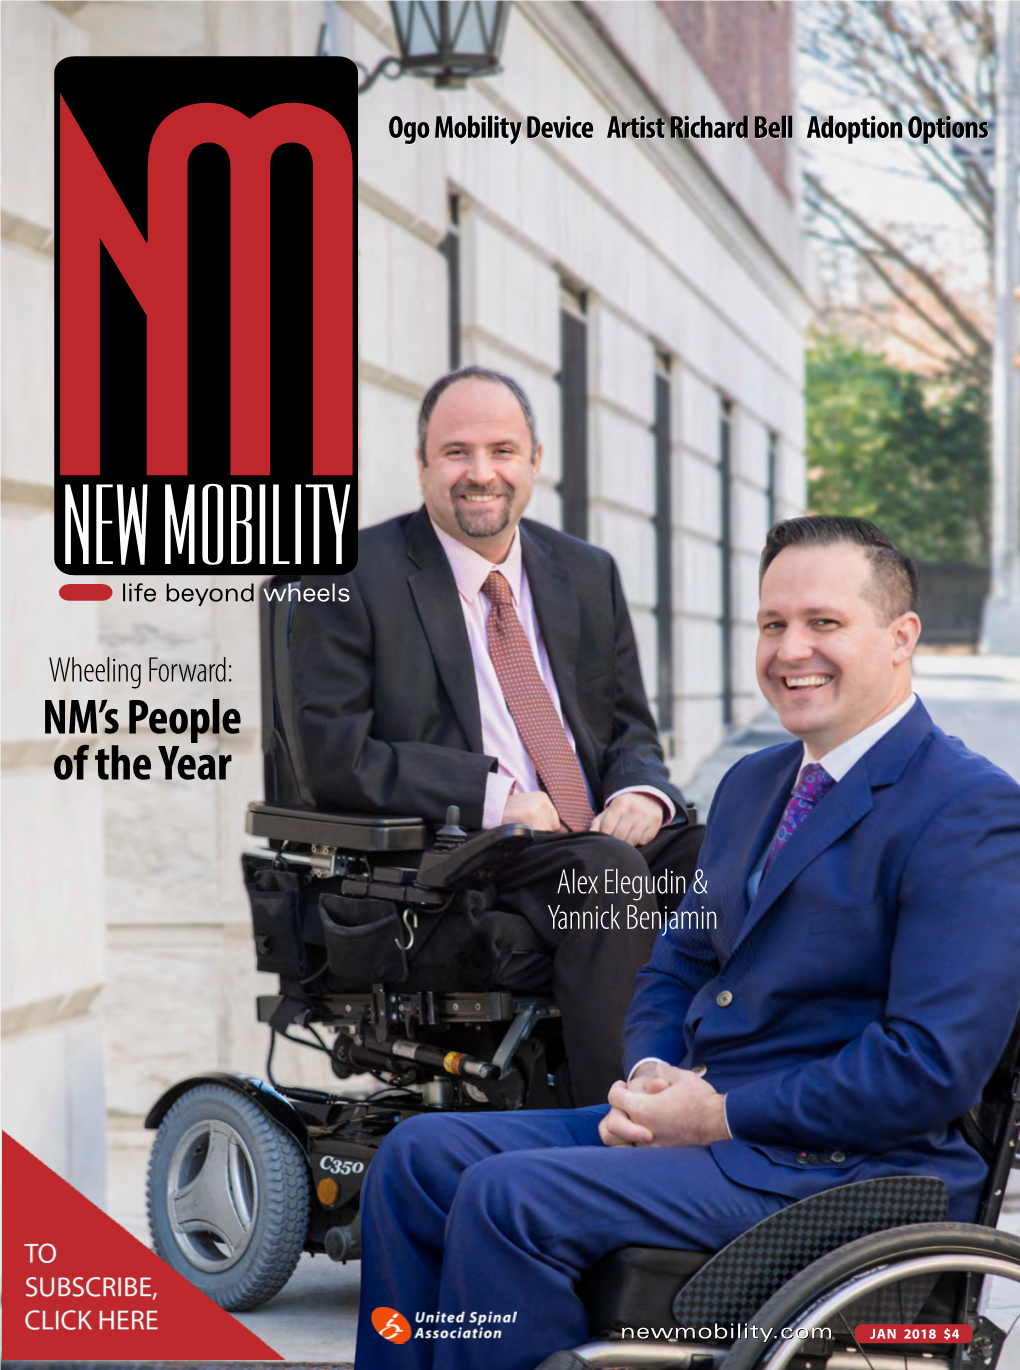 NM's People of the Year